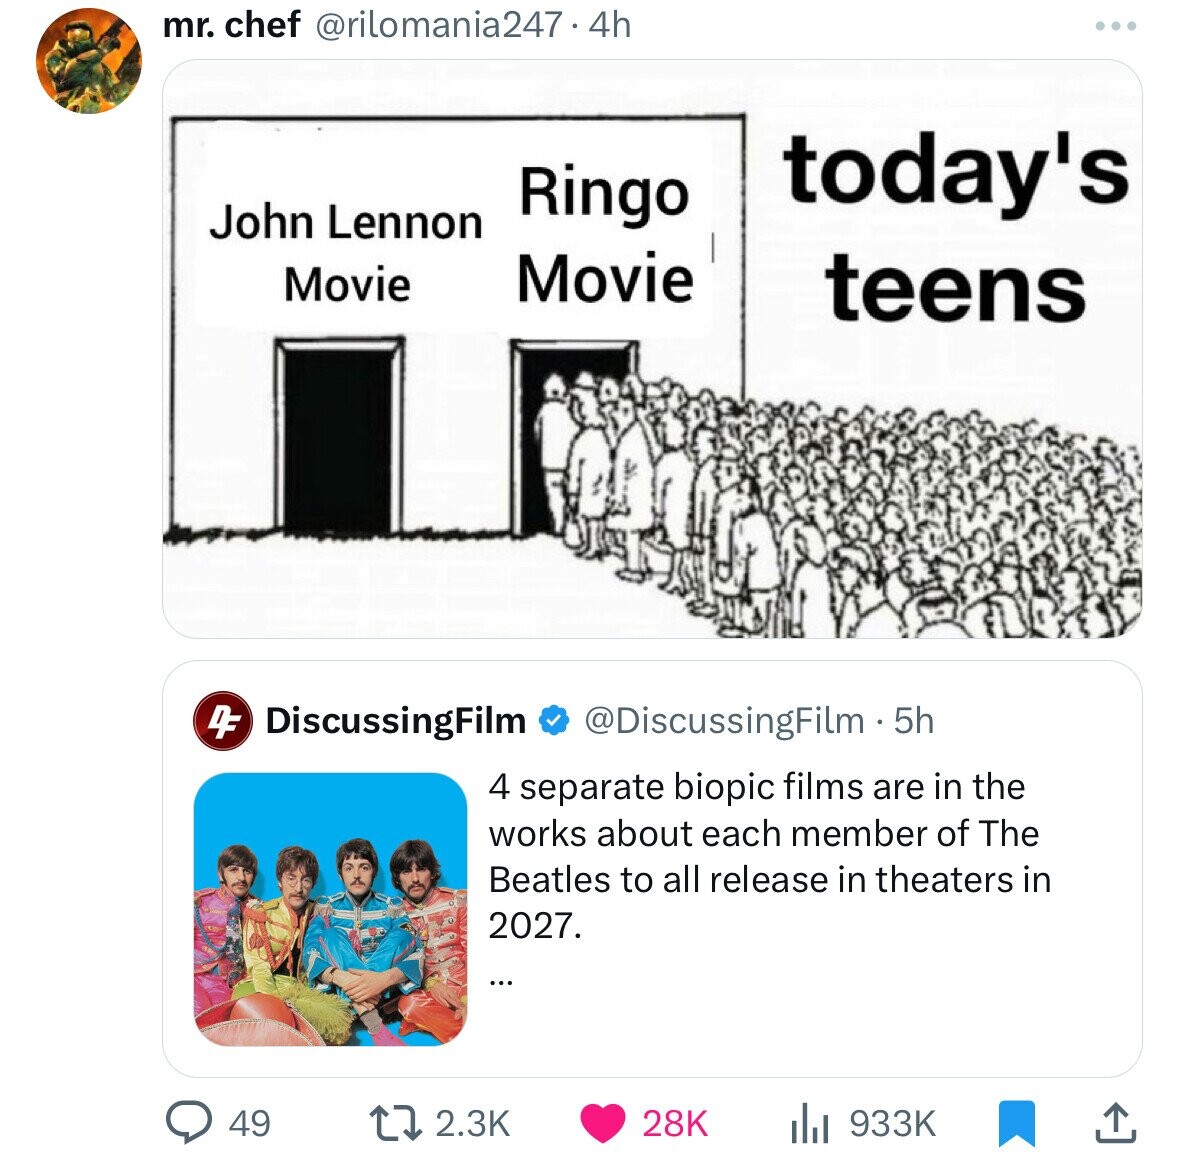 today's teen meme - mr. chef .4h John Lennon Ringo today's Movie teens Movie 4 DiscussingFilm 5h 4 separate biopic films are in the works about each member of The Beatles to all release in theaters in 2027. 49 28K